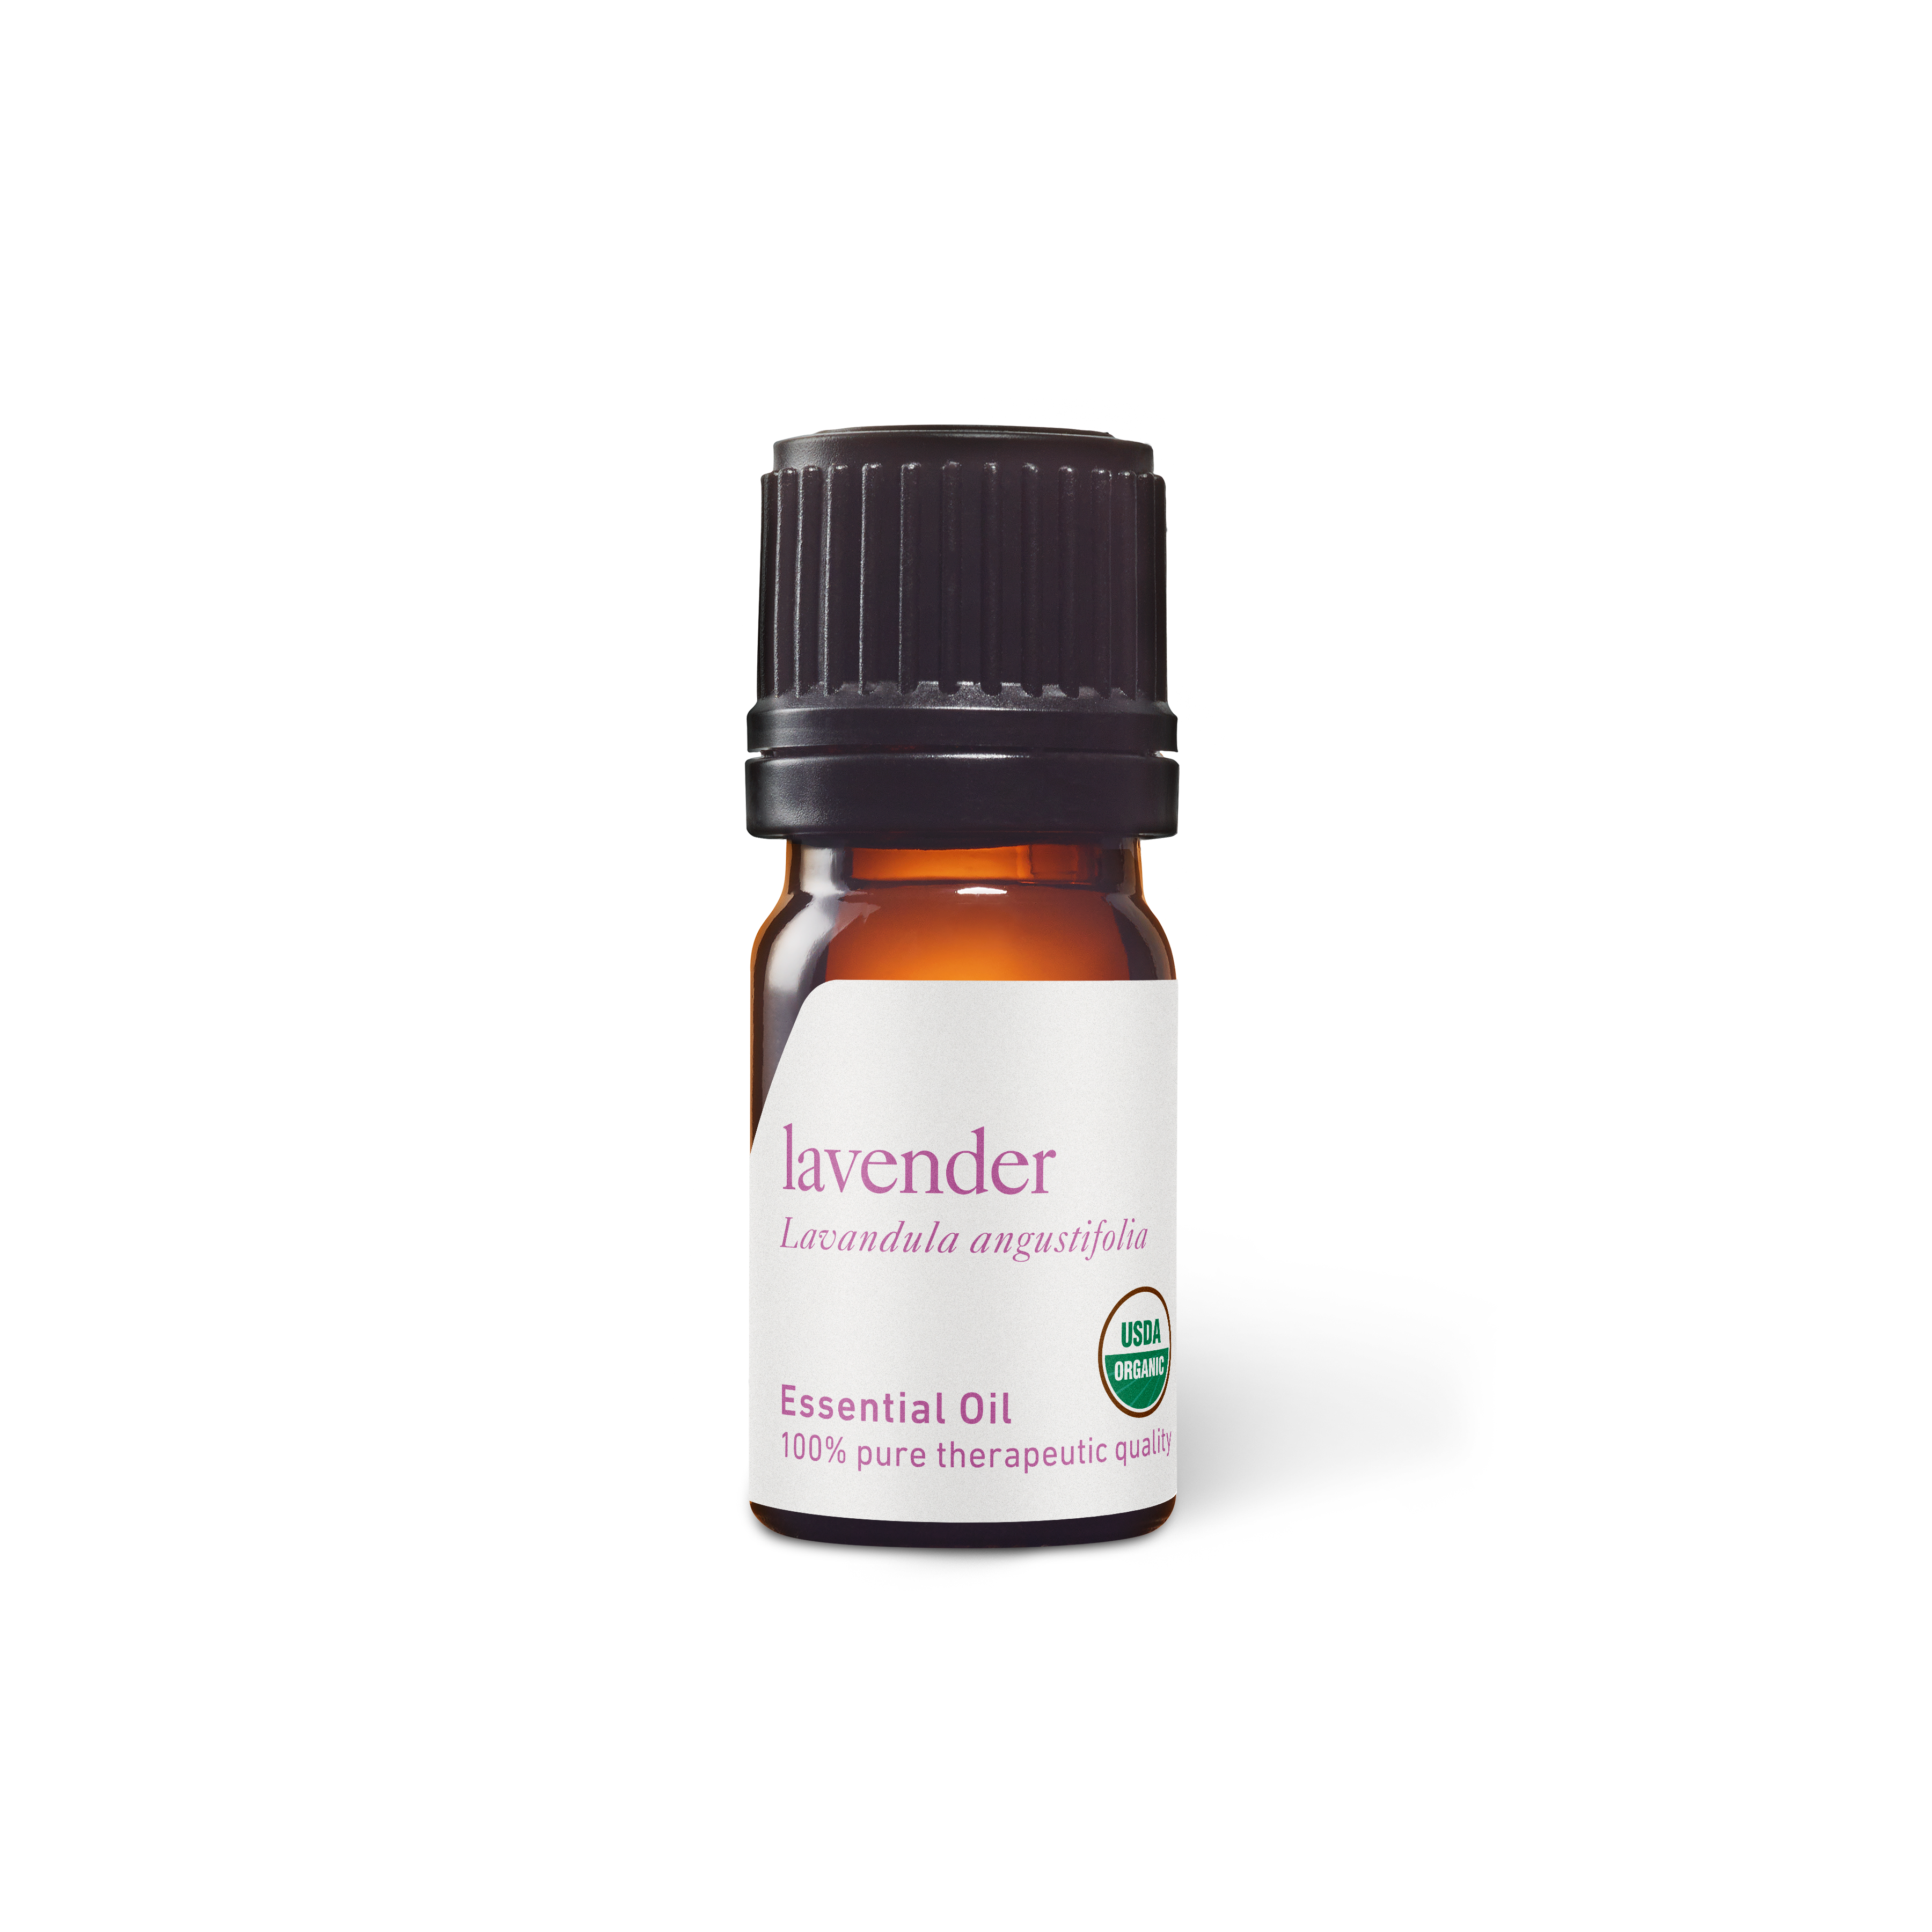 Plant Therapy Organic Lavender Essential Oil | The Healthy Place